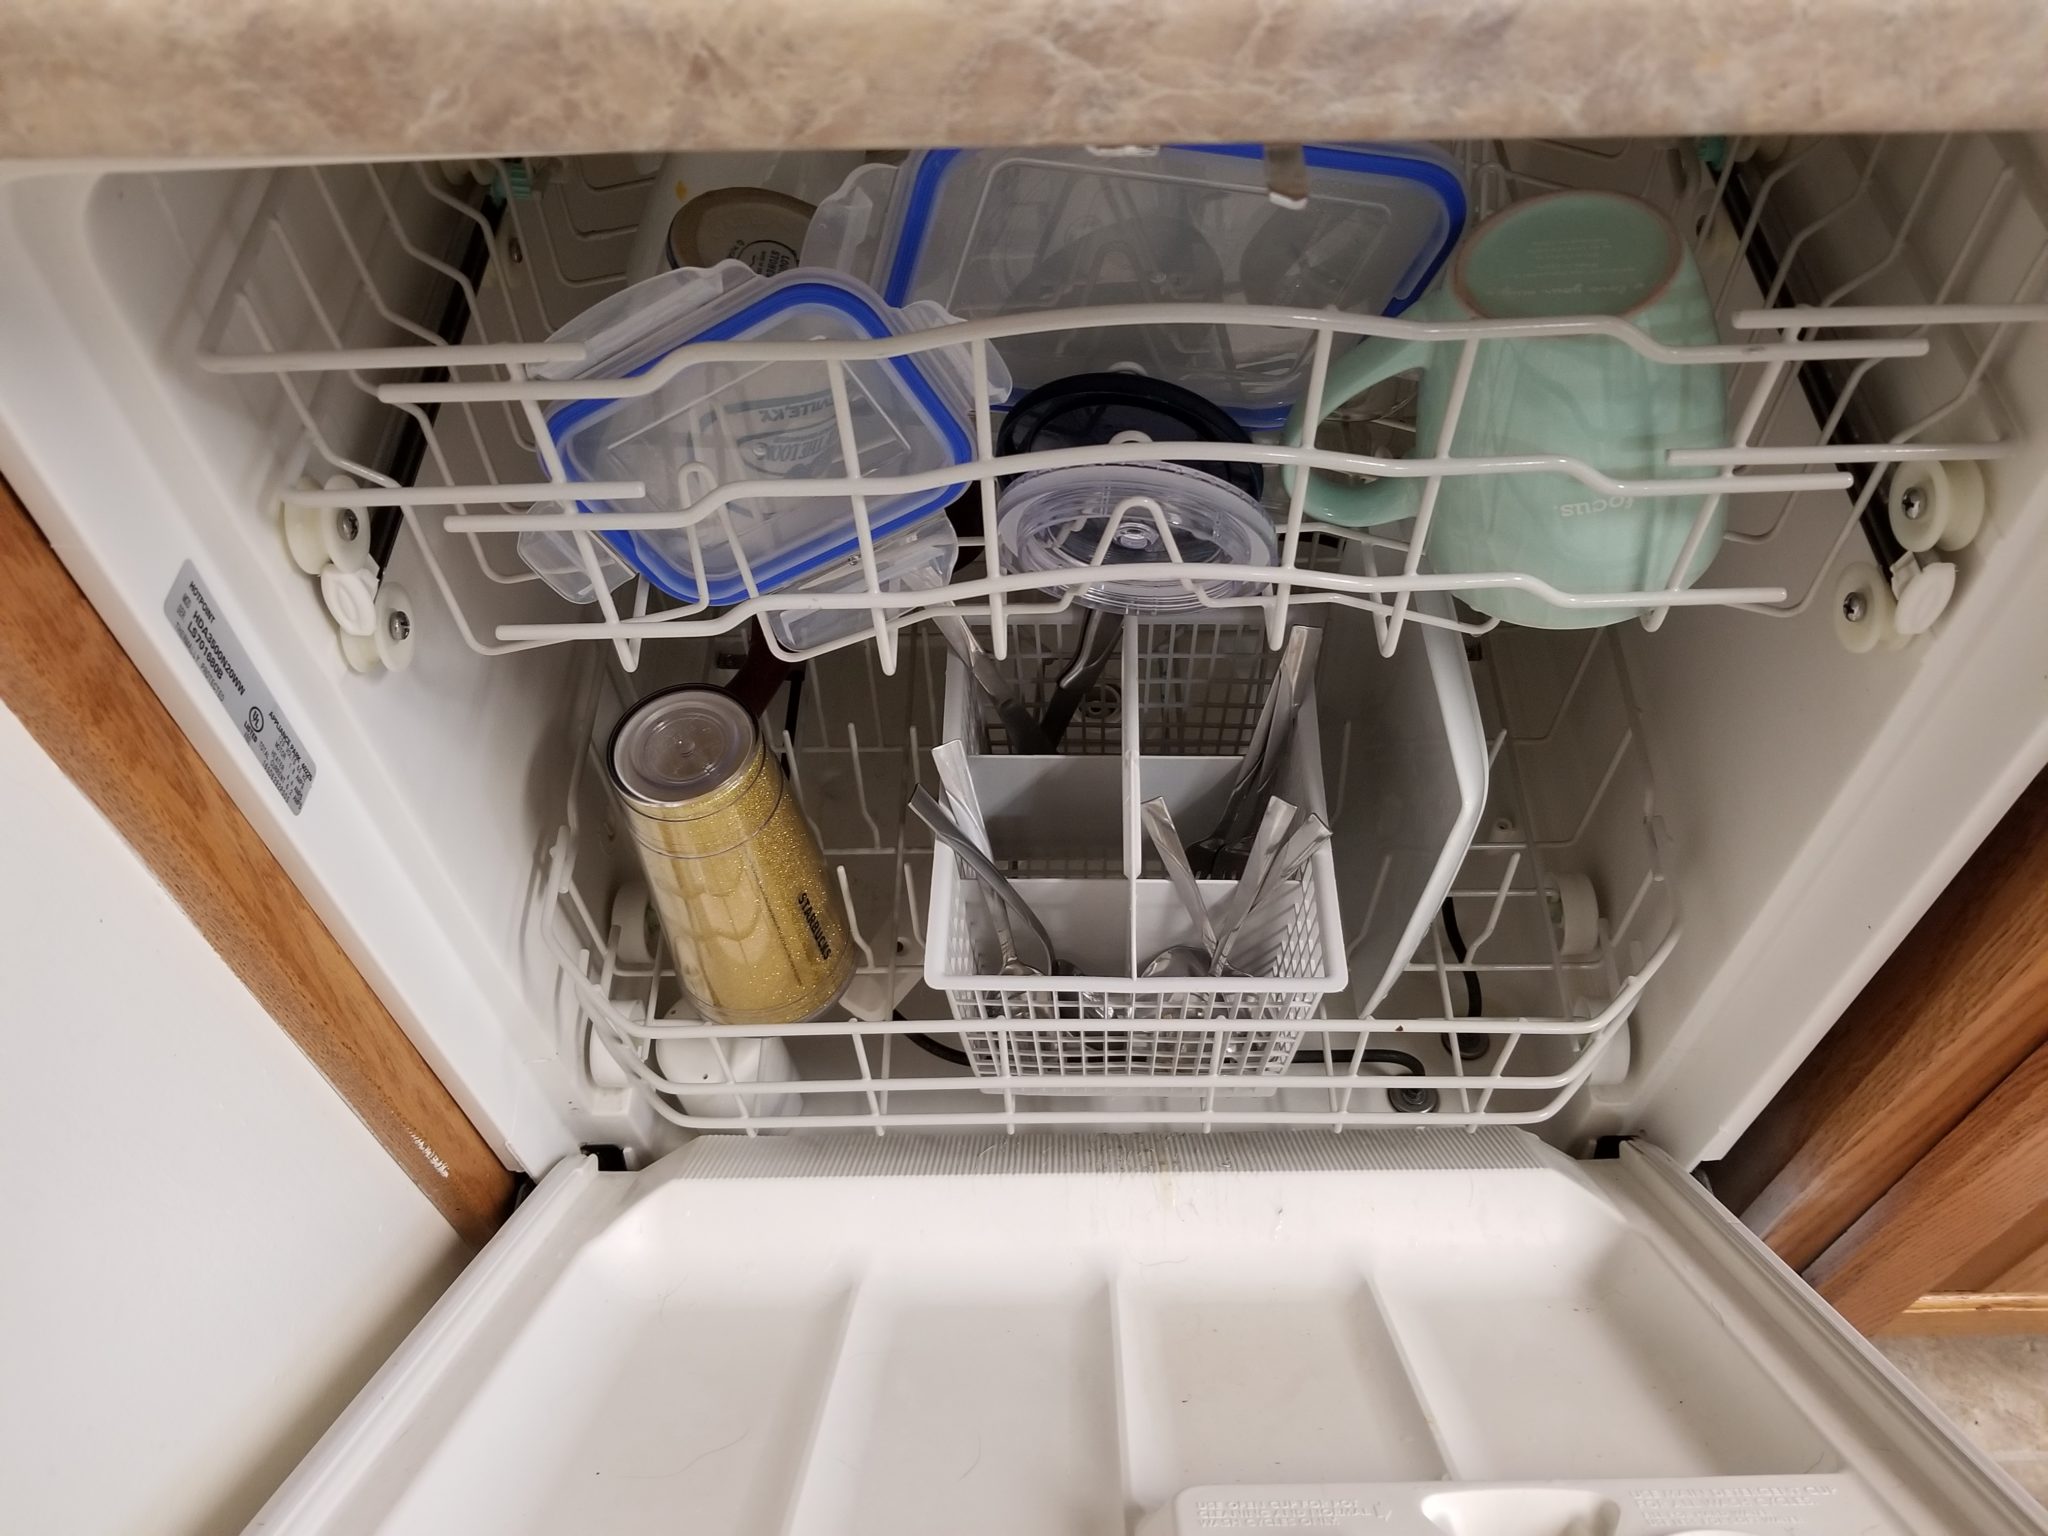 Using My Dishwasher For One Month